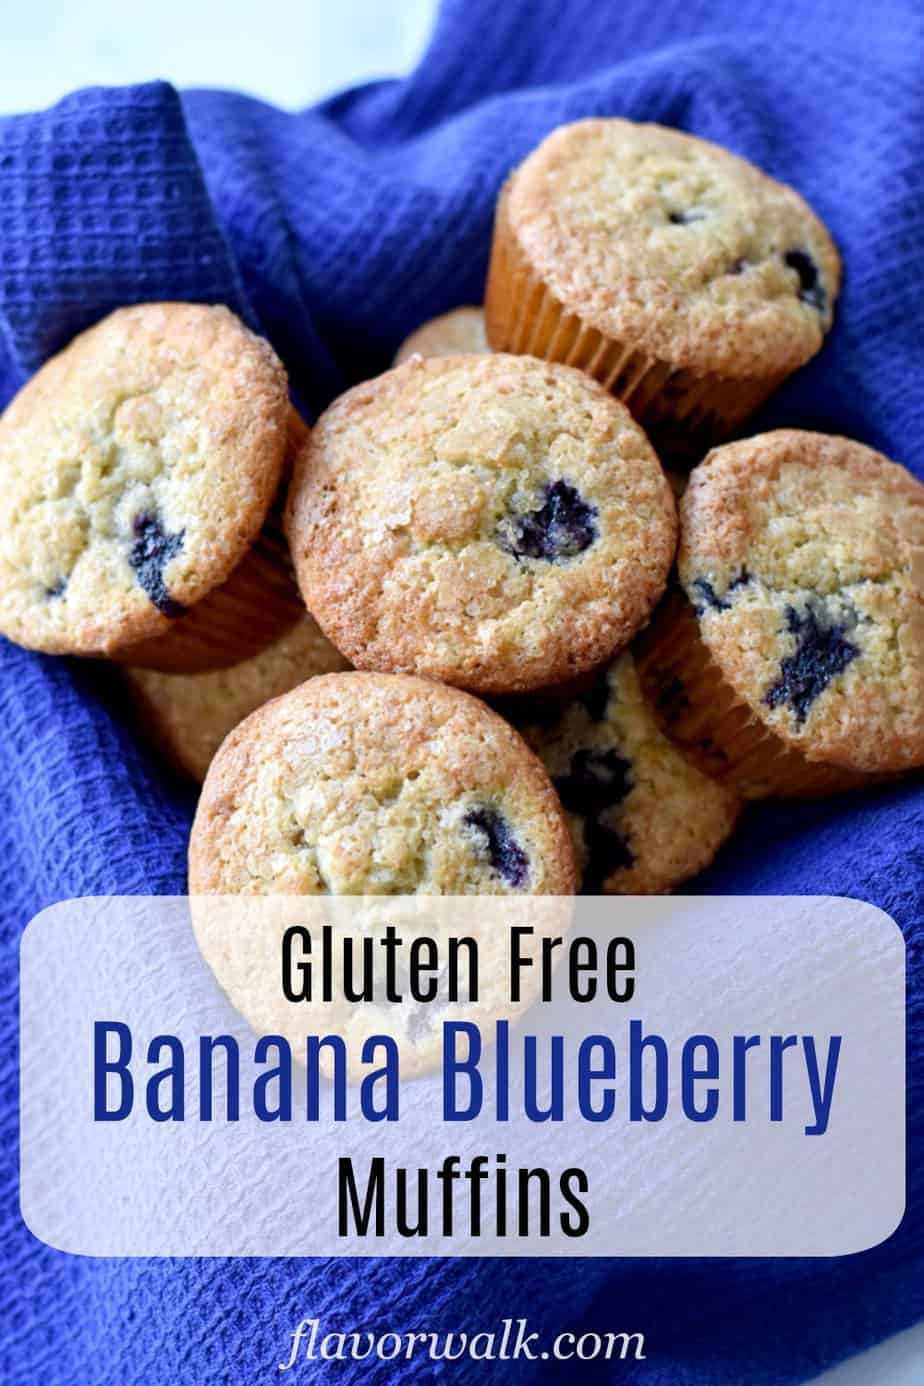 A basket, lined with a blue kitchen towel, filled with gluten free banana blueberry muffins and a white text overlay.